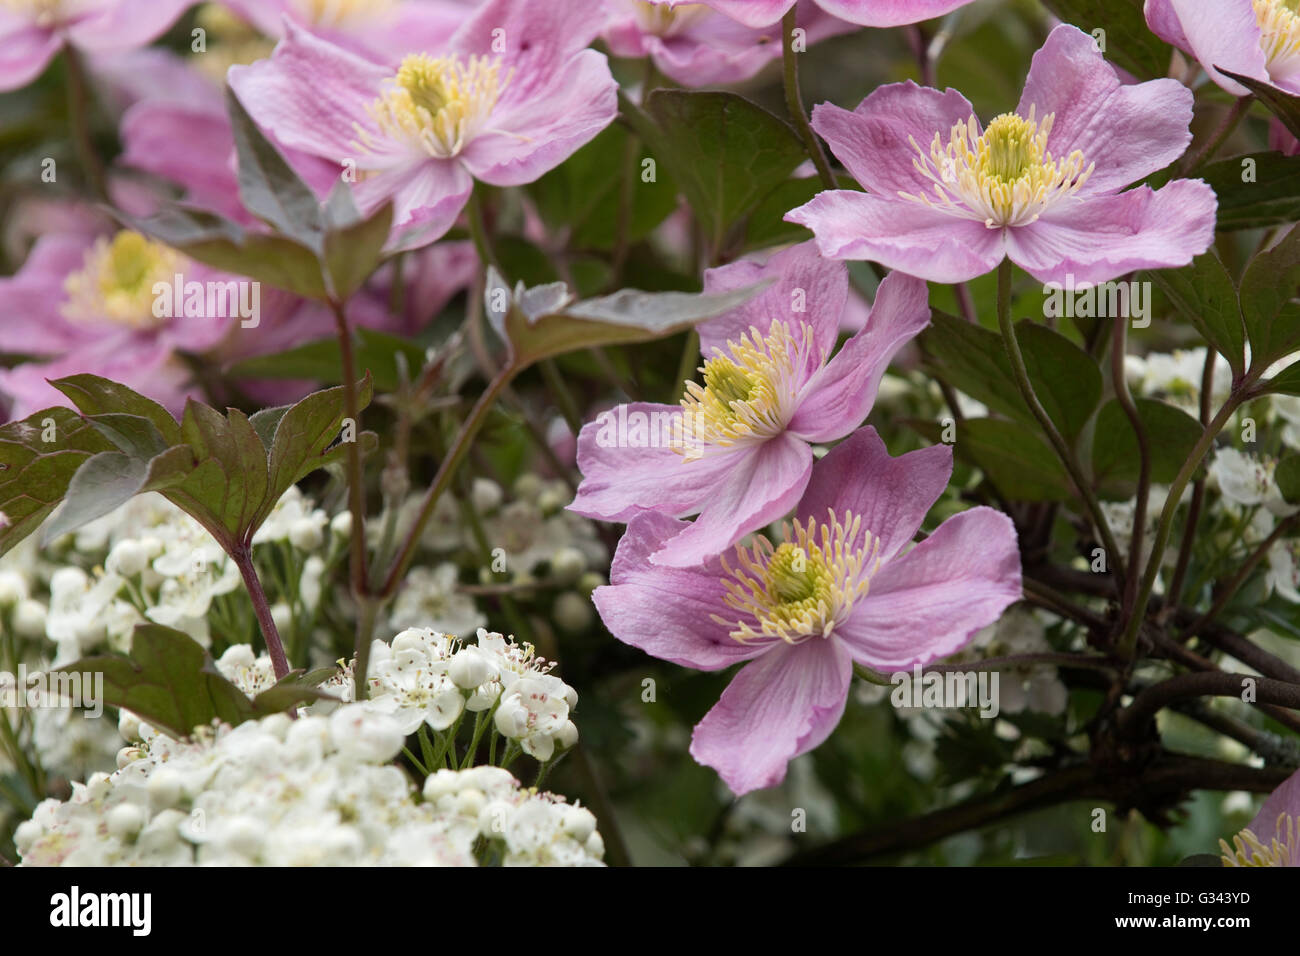 Clematis montana var rubens 'Terarose' flowers intertwined with may blossom on a hawthorn tree, May Stock Photo